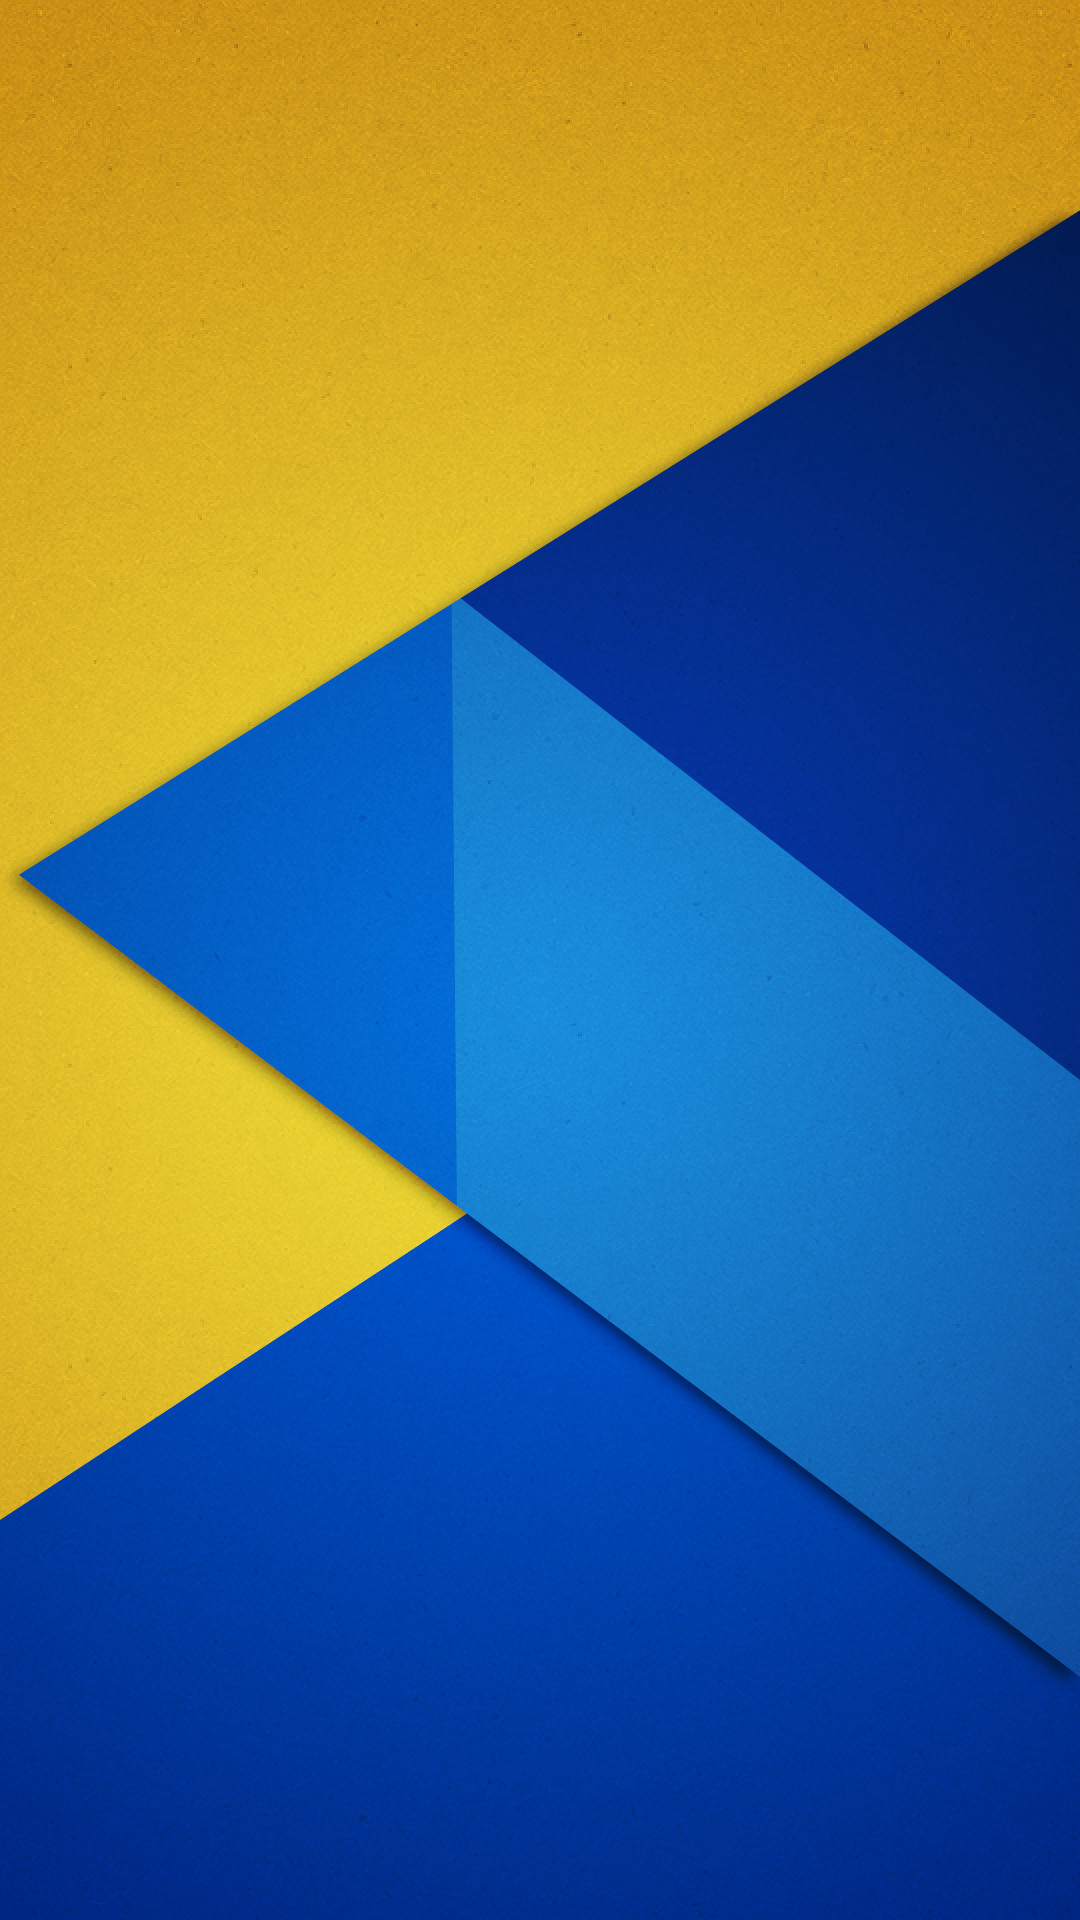 Add A Touch Of Marshmallow With These Unofficial Wallpapers